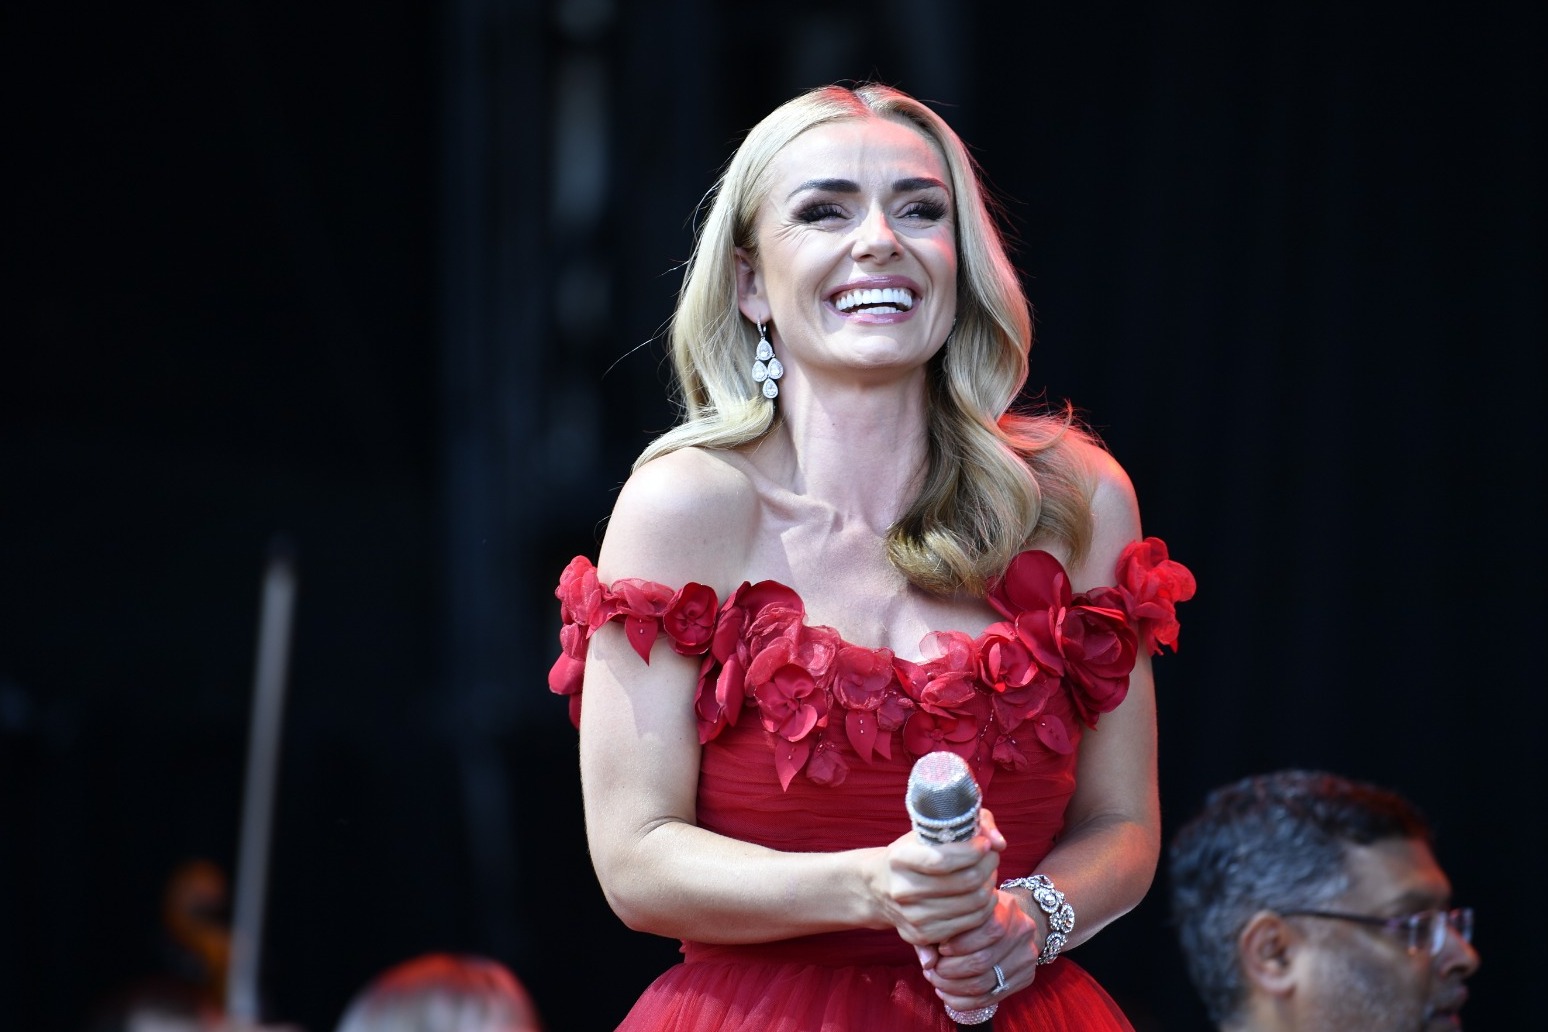 Katherine Jenkins: Music helps bring out emotions at Queen’s memorial events 